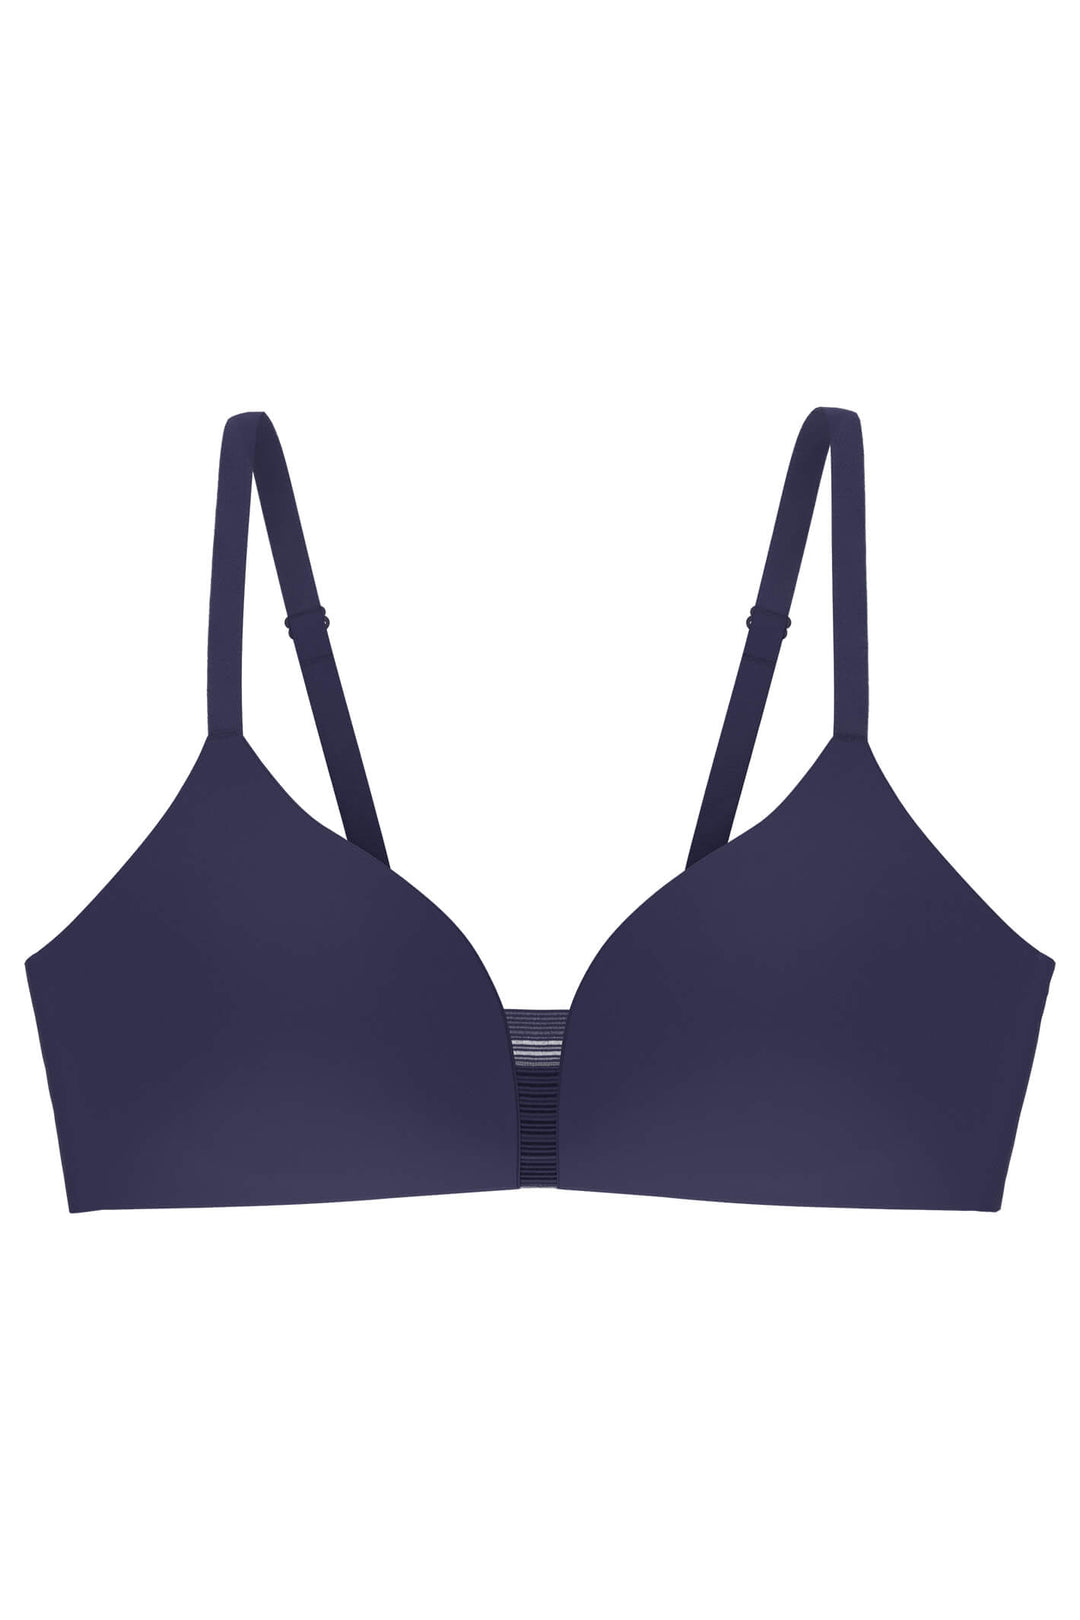 Pour Moi PM-183300 Blue/Rose Forever Fiore Padded Plunge Bra in